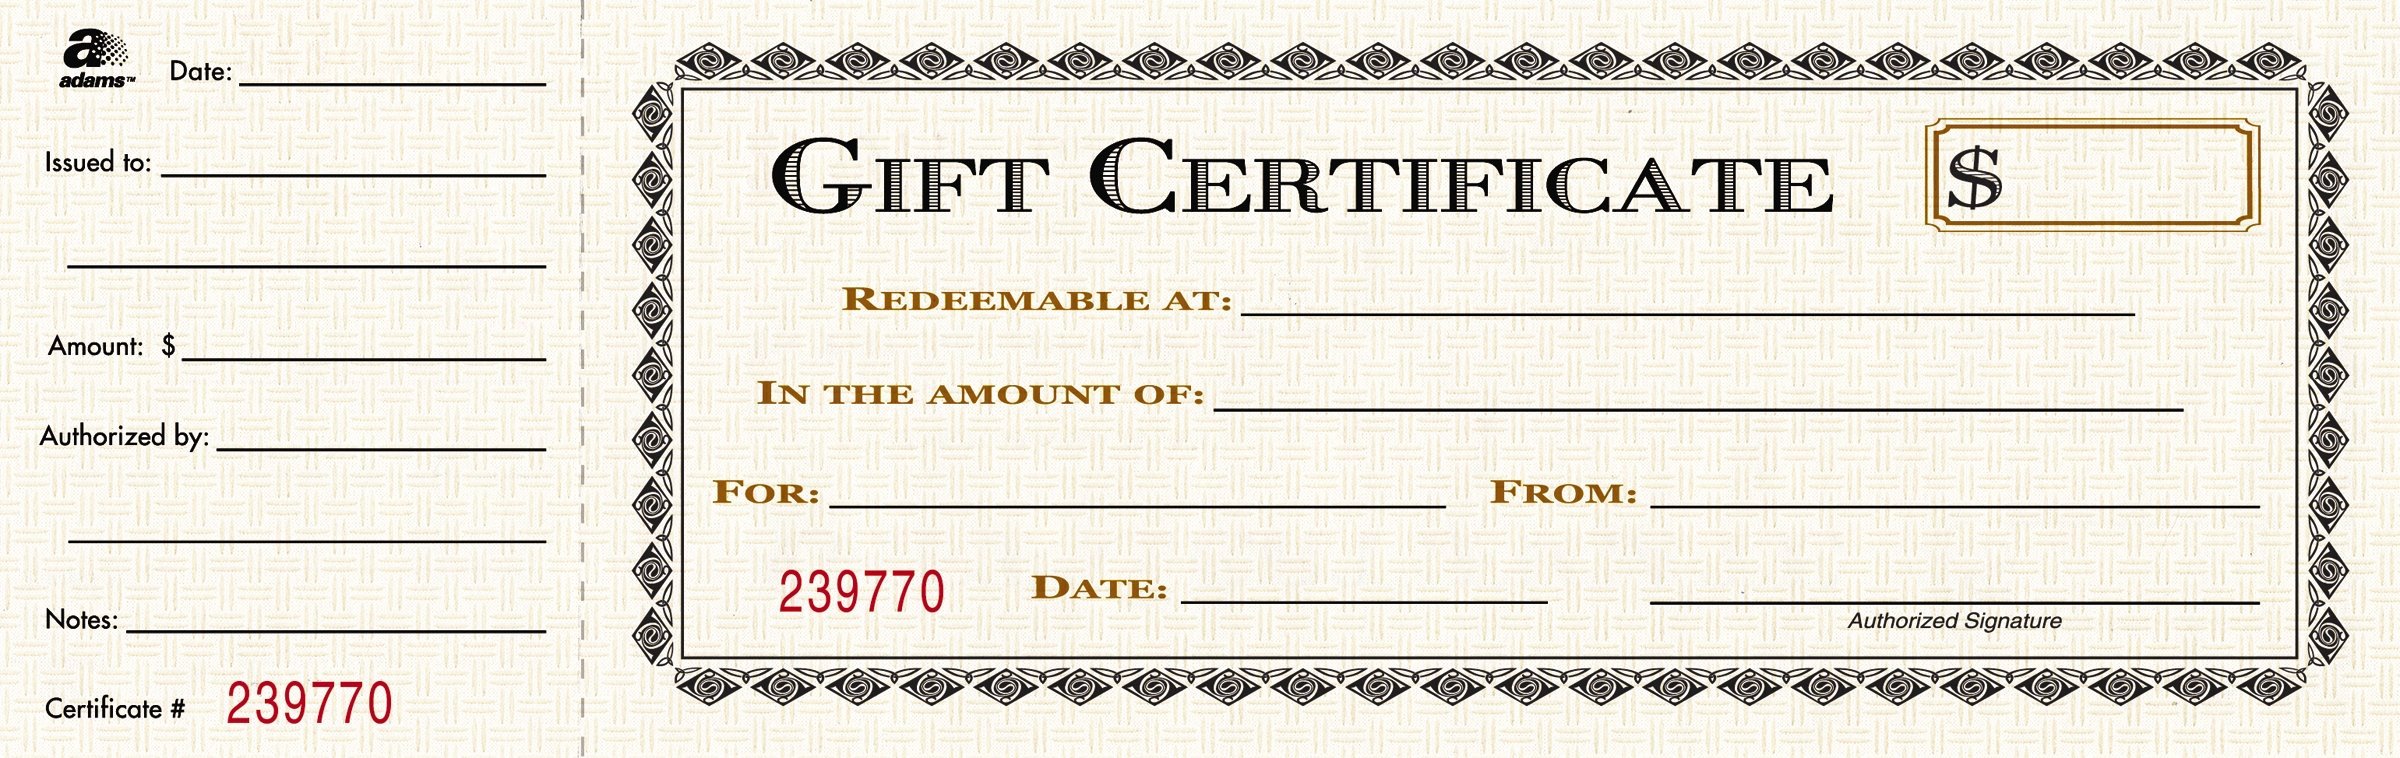 Best Paper for Certificates Best Of Amazon Best Paper Greetings 50 Sheet Gift Certificate